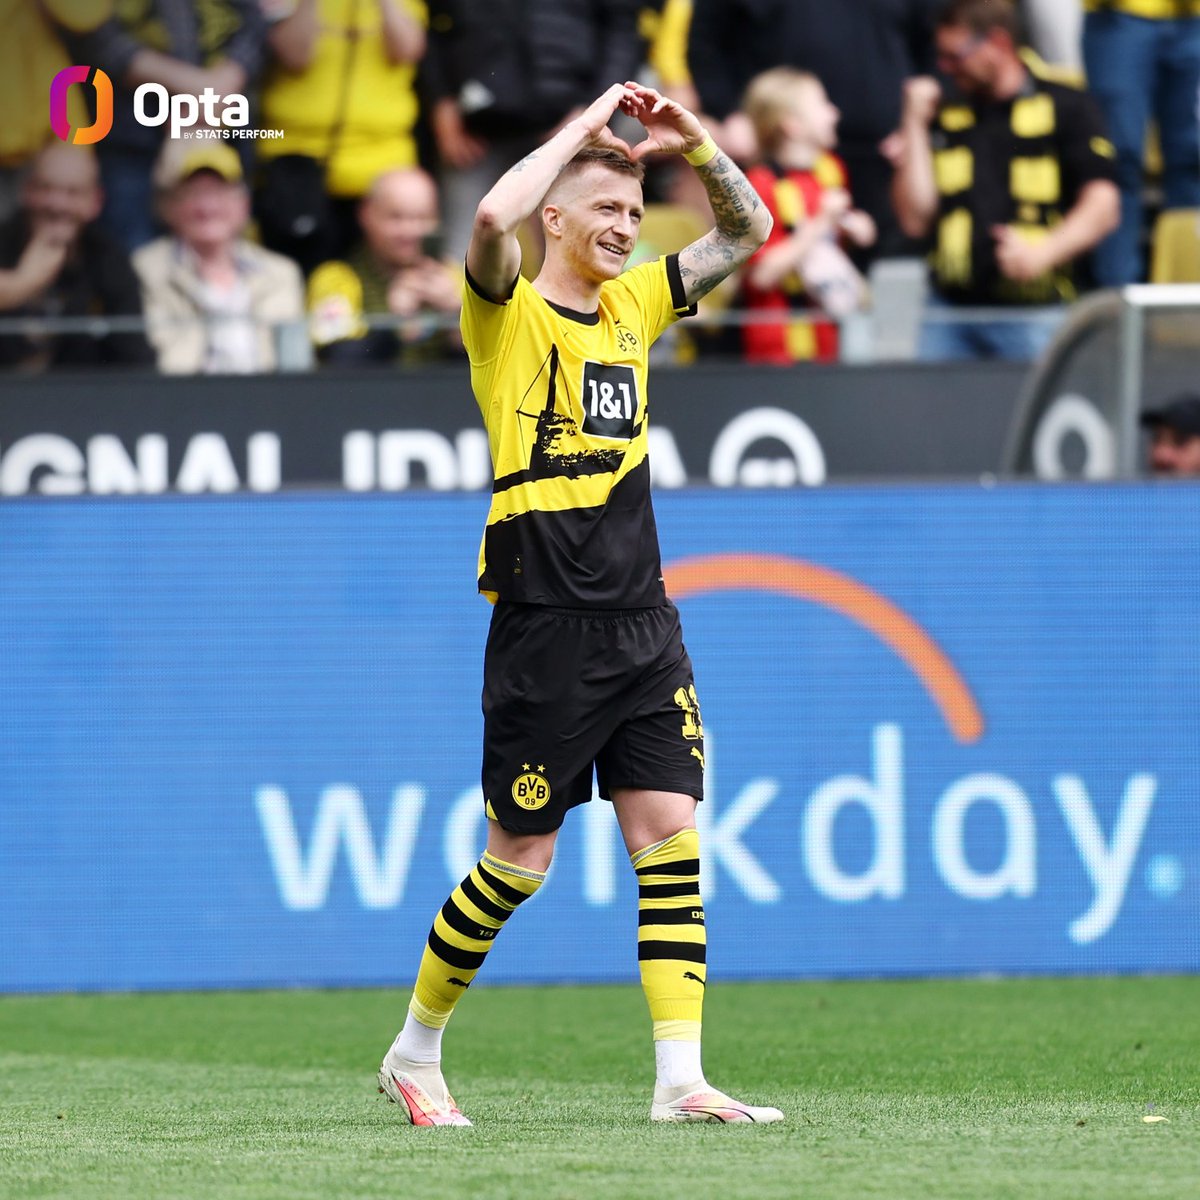 34 - Aged 34 years and 339 days, Dortmund’s Marco Reus is the oldest player to be directly involved in 3+ goals in a Bundesliga match (1G 2A) since Bayern's Franck Ribéry in March 2019 (35J 336T against Wolfsburg). Wine. #BVBFCA